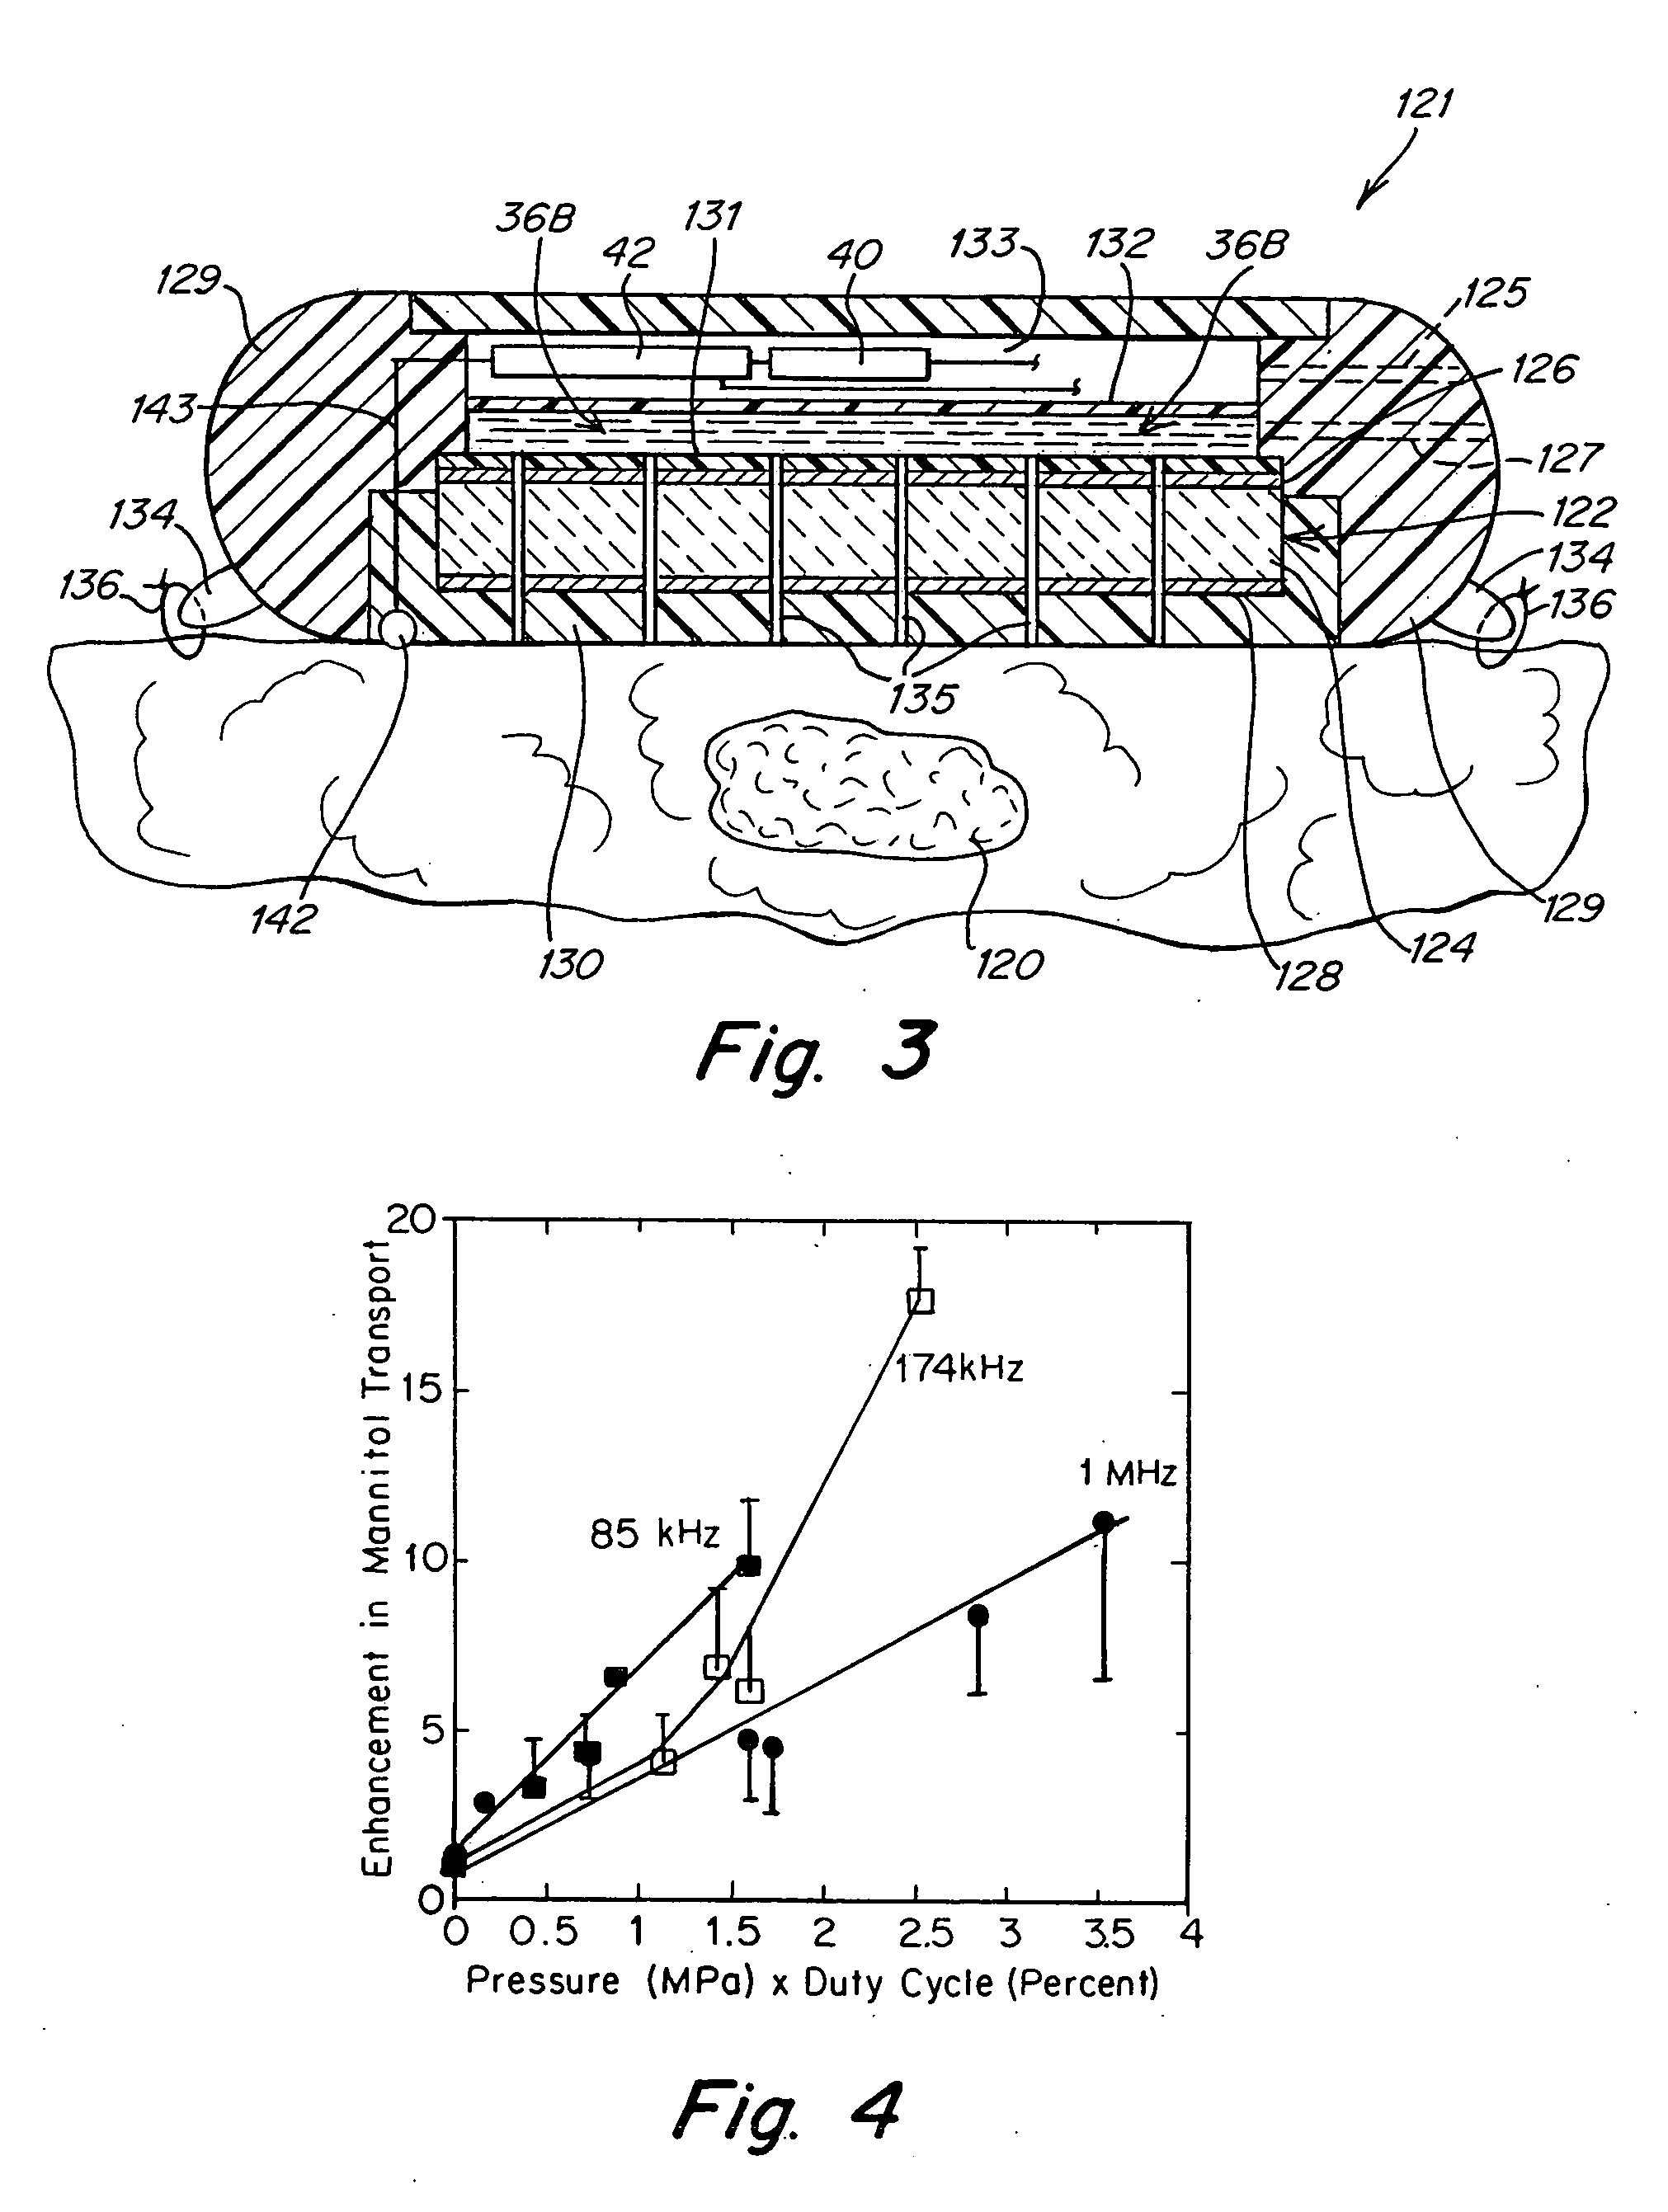 Method and apparatus for ultrasonically increasing the transportation of therapeutic substances through tissue